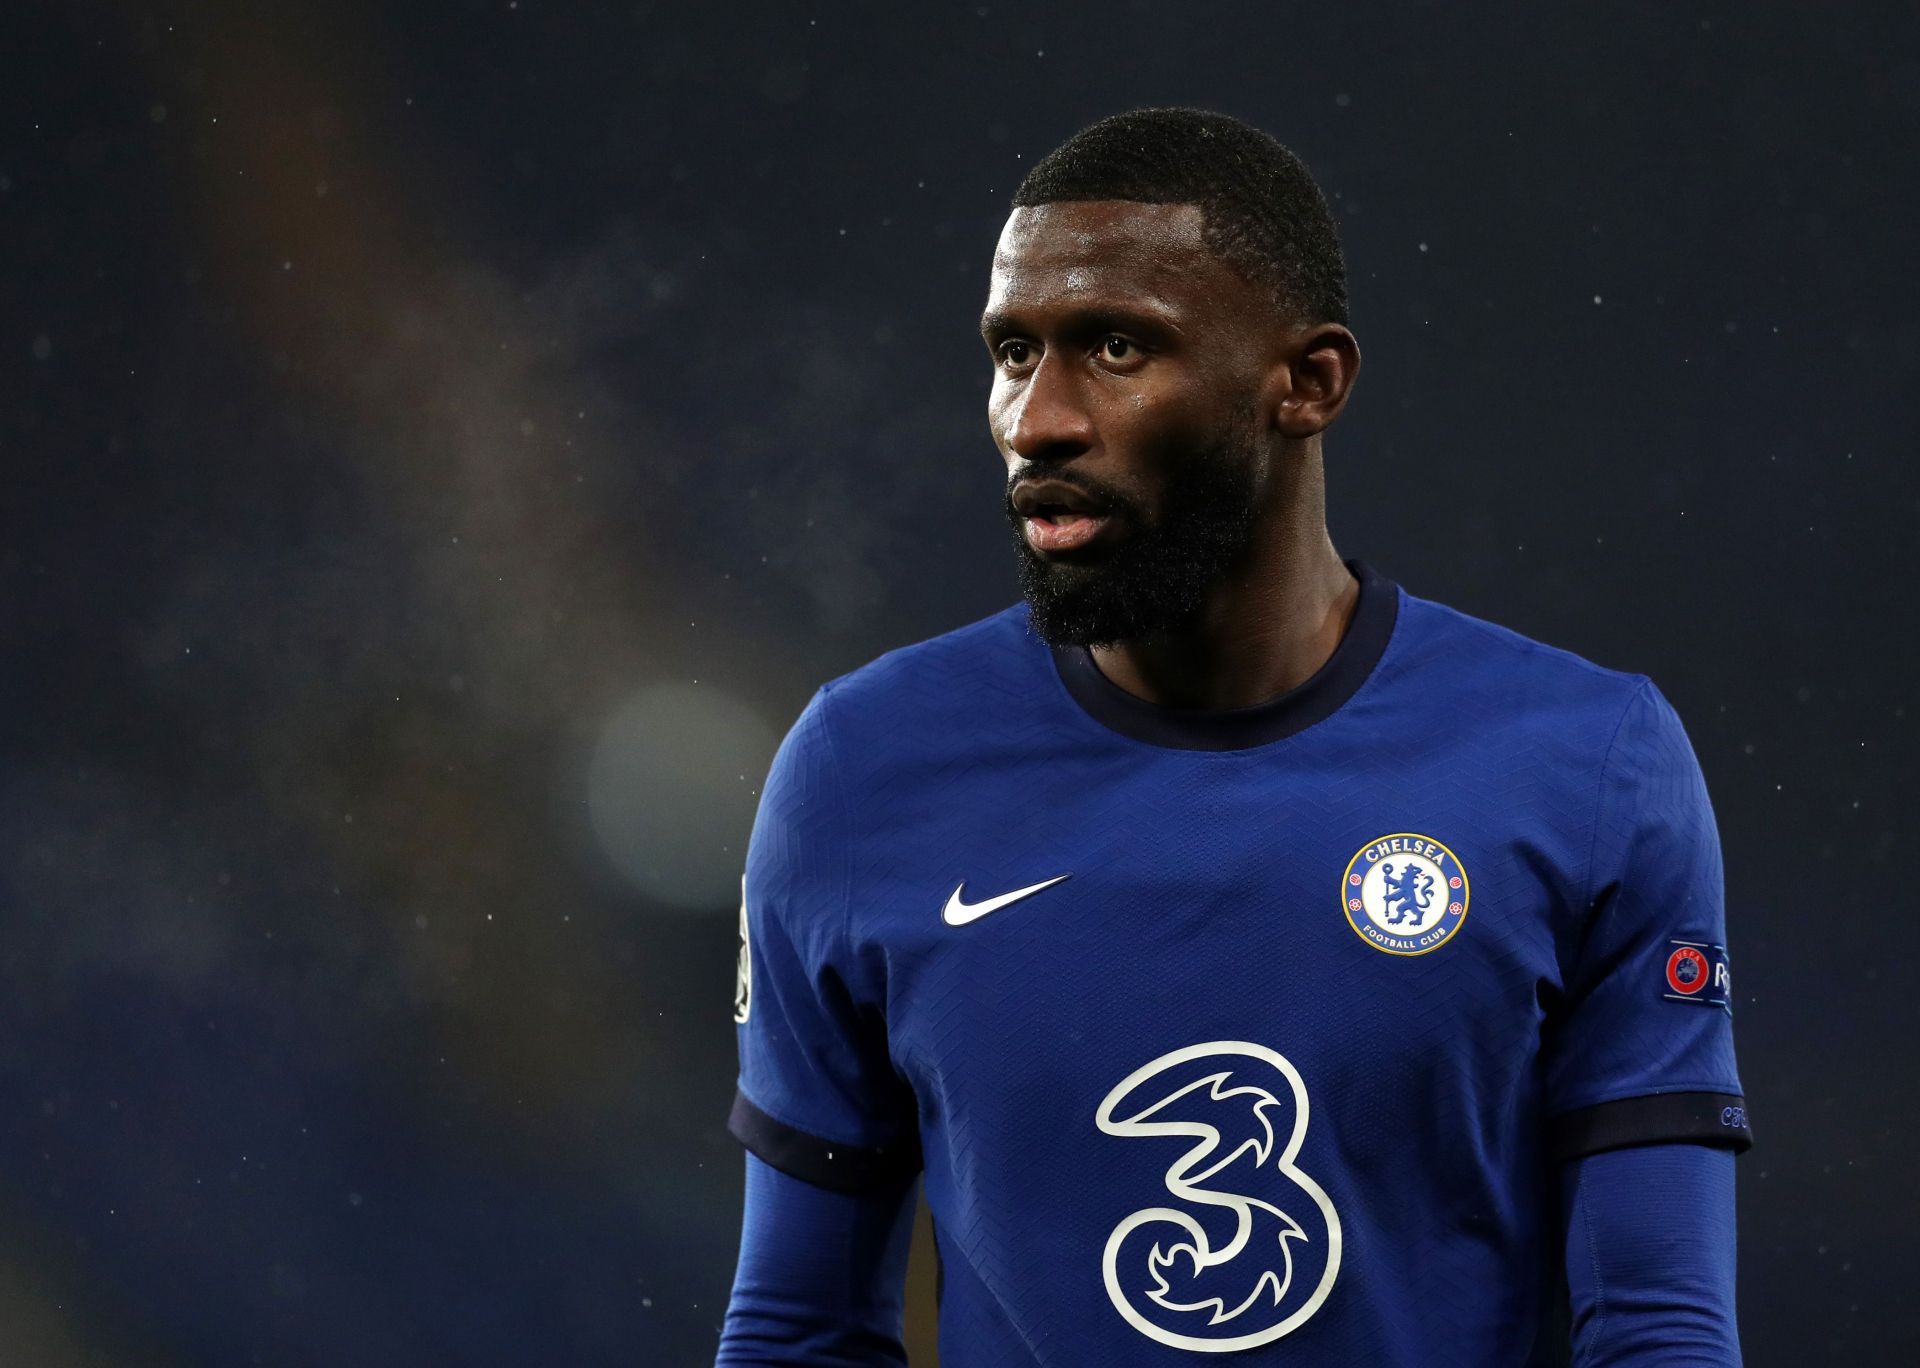 Chelsea and Germany centre-back Antonio Rudiger